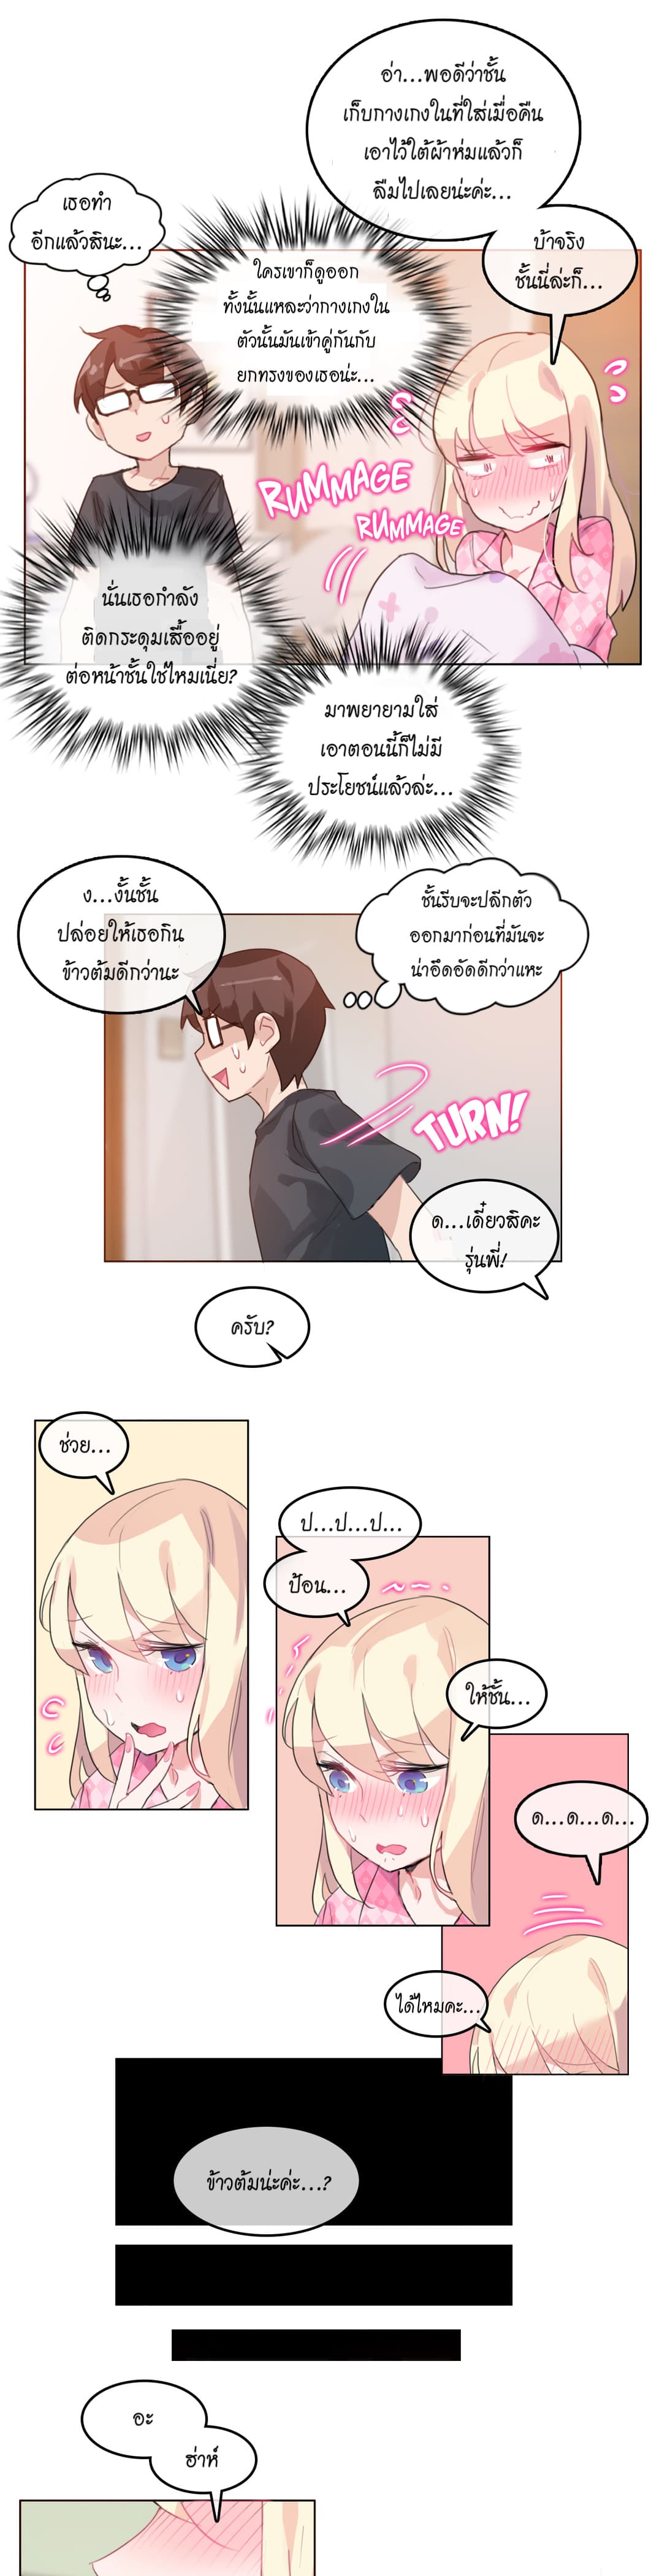 A Pervert’s Daily Life 15 (13)